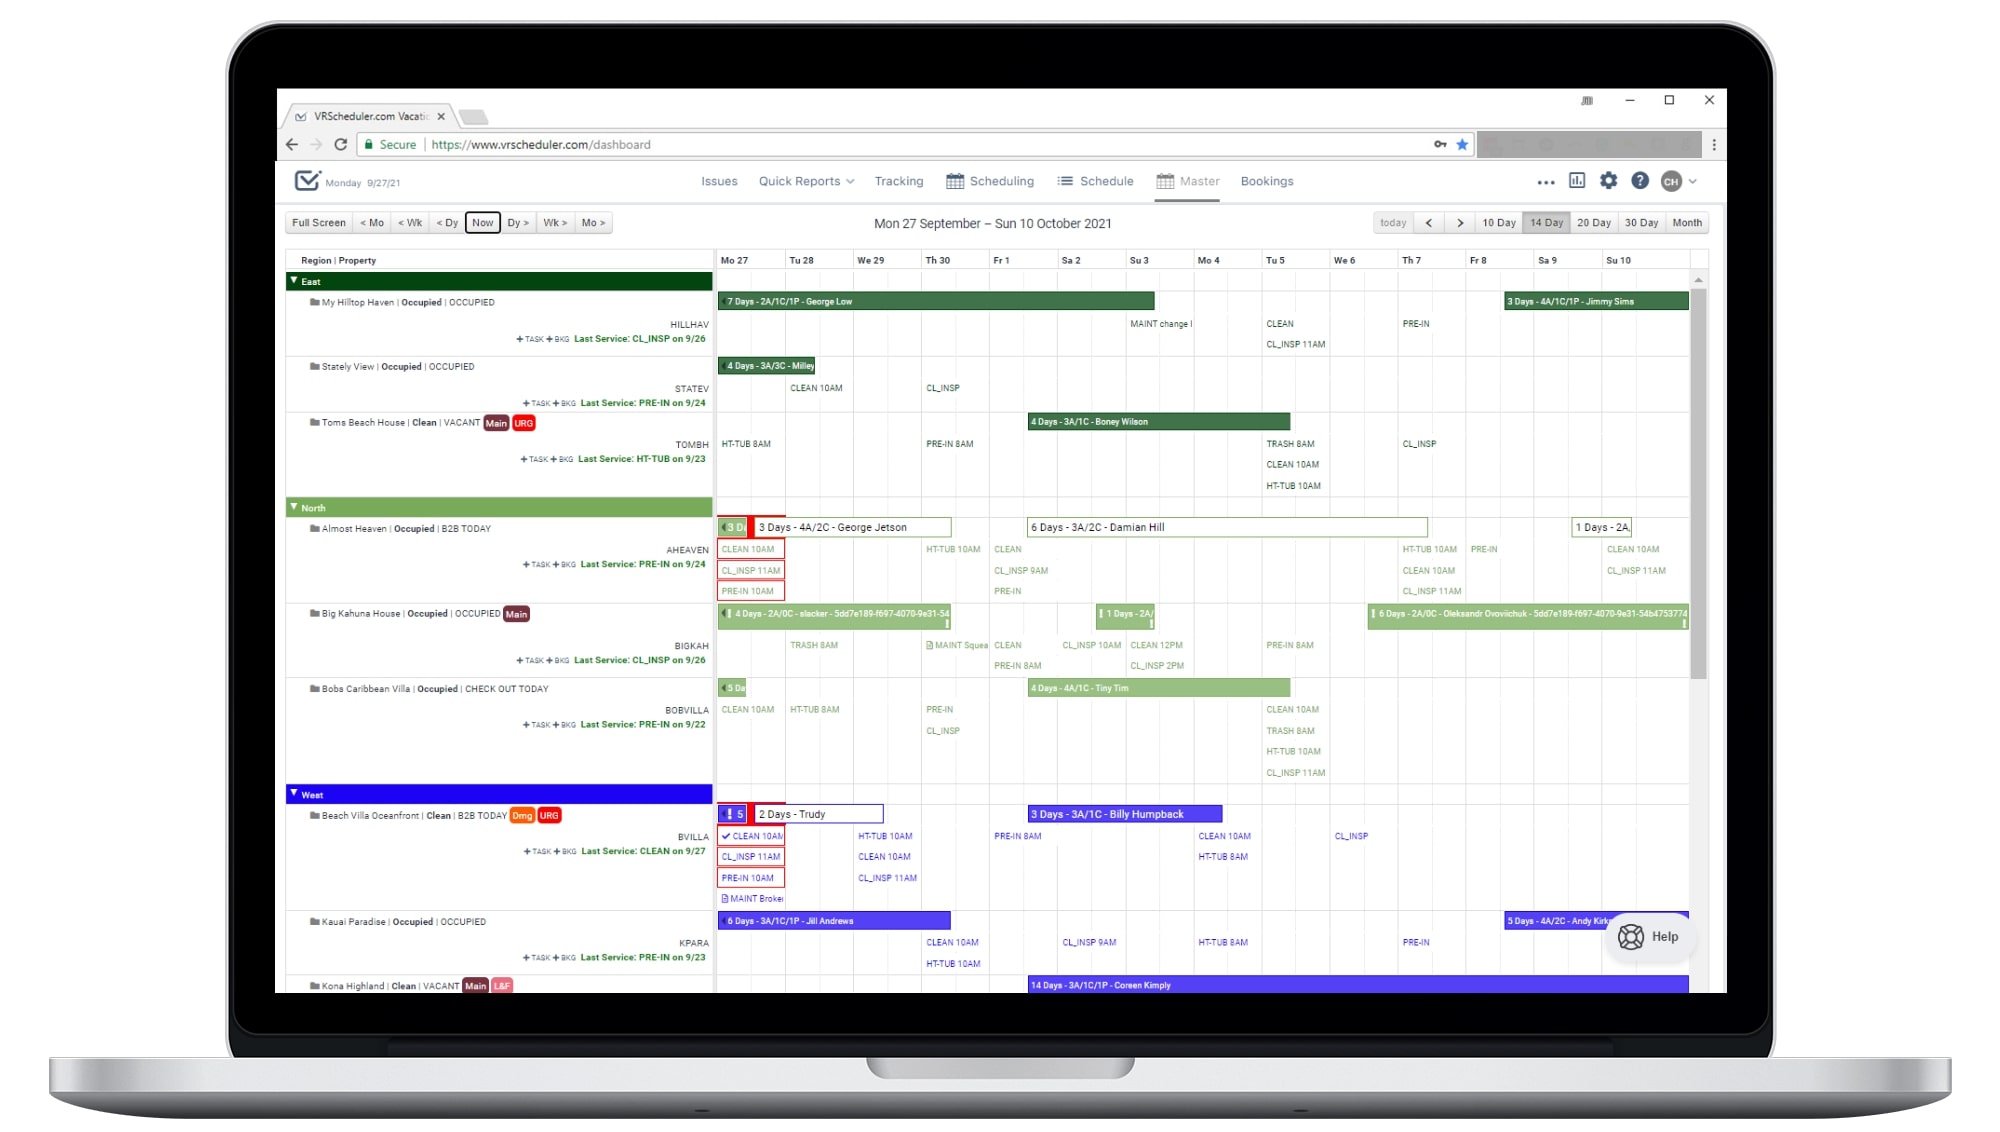 Choosing a software like Operto Teams means you’ll have a central source of truth for all your operations and communications. Keep track of everything from cleaning tasks to employee schedules.